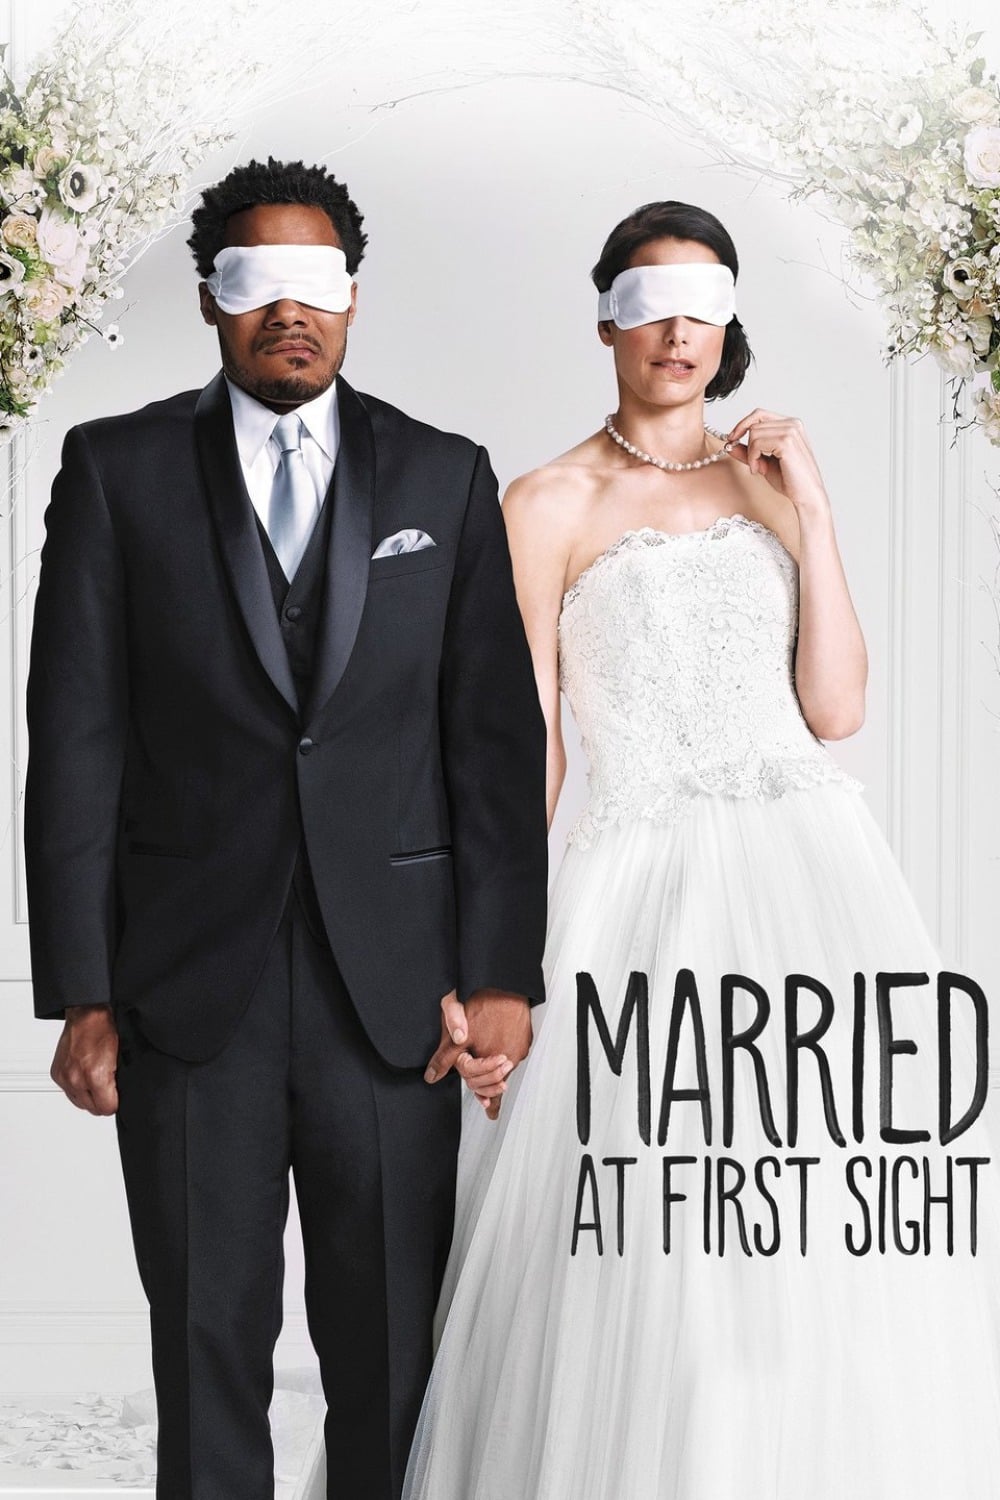 Married at First Sight UK - Season 6